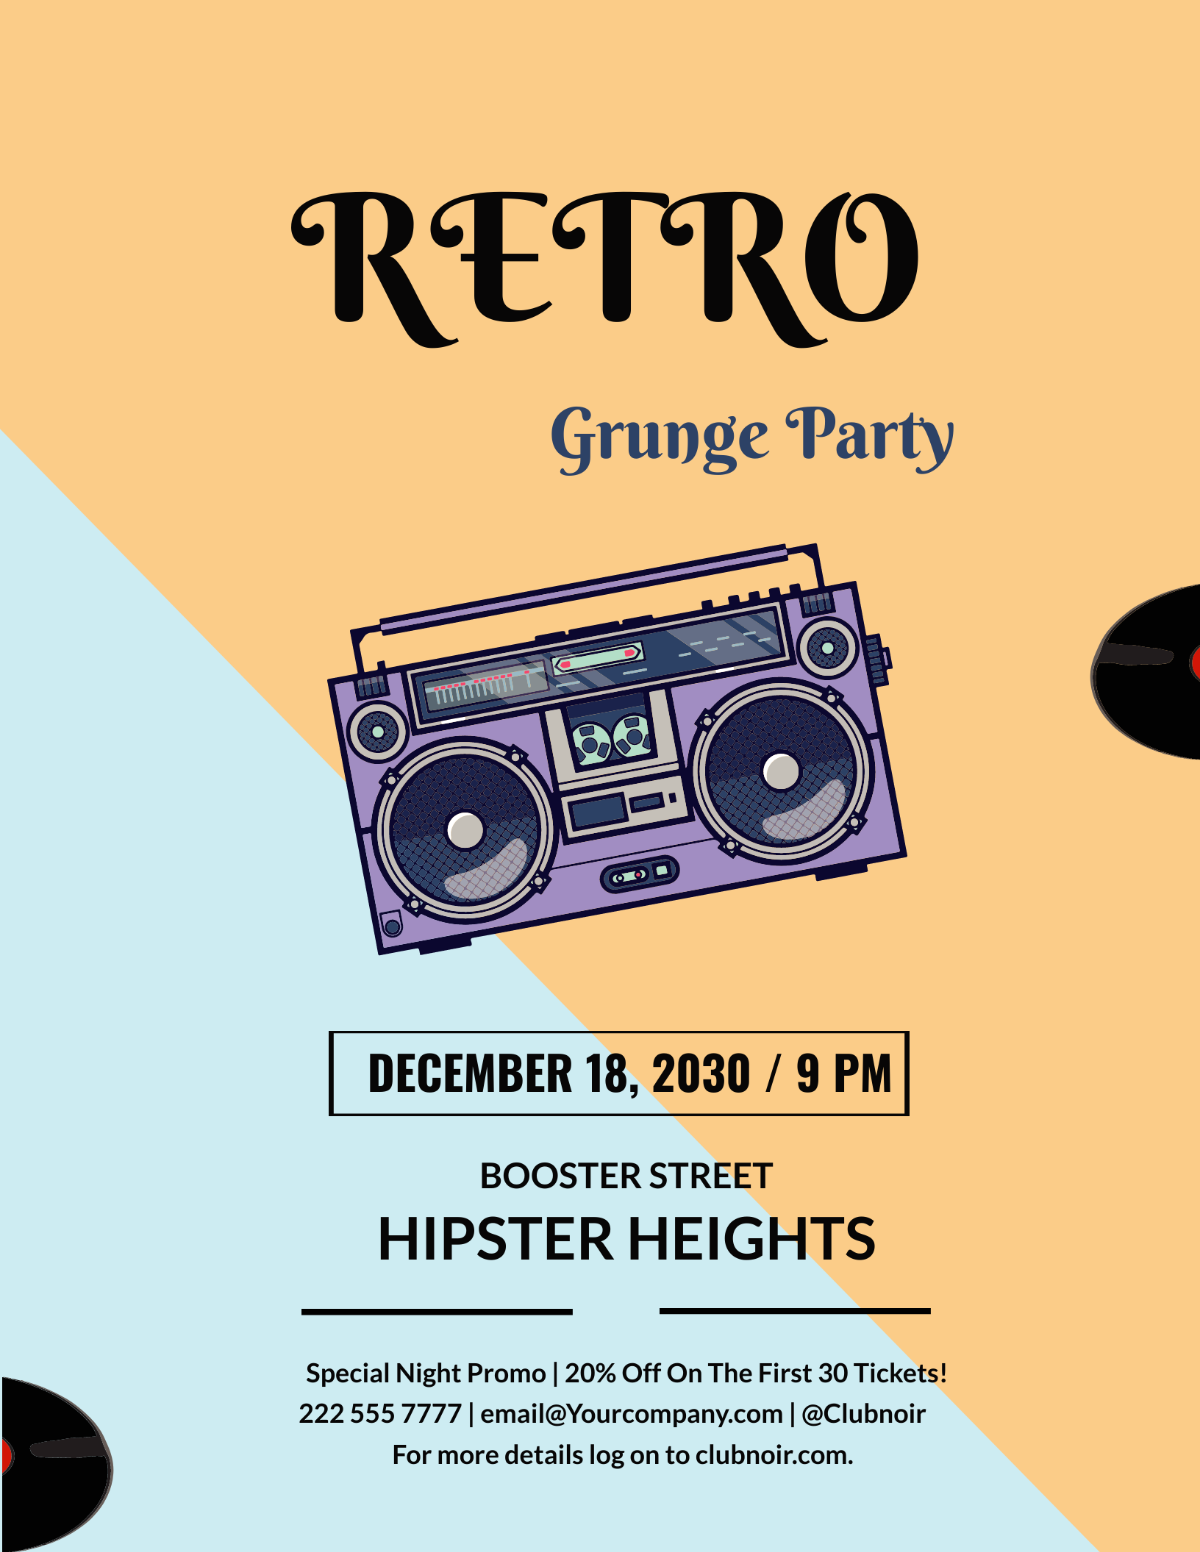 Free Retro Grunge Party Flyer Template